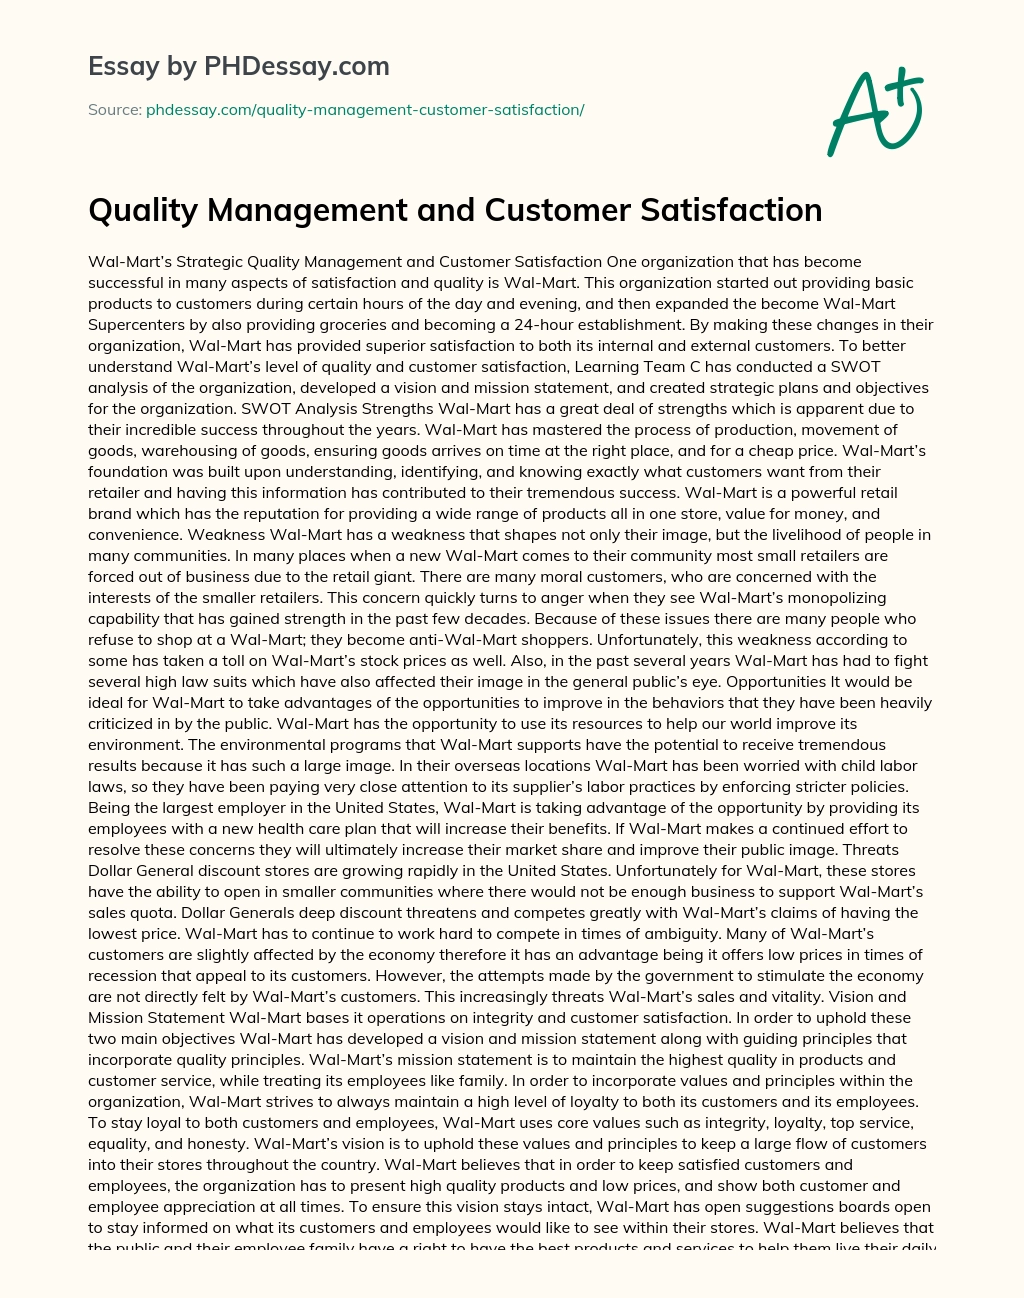 Quality Management and Customer Satisfaction essay